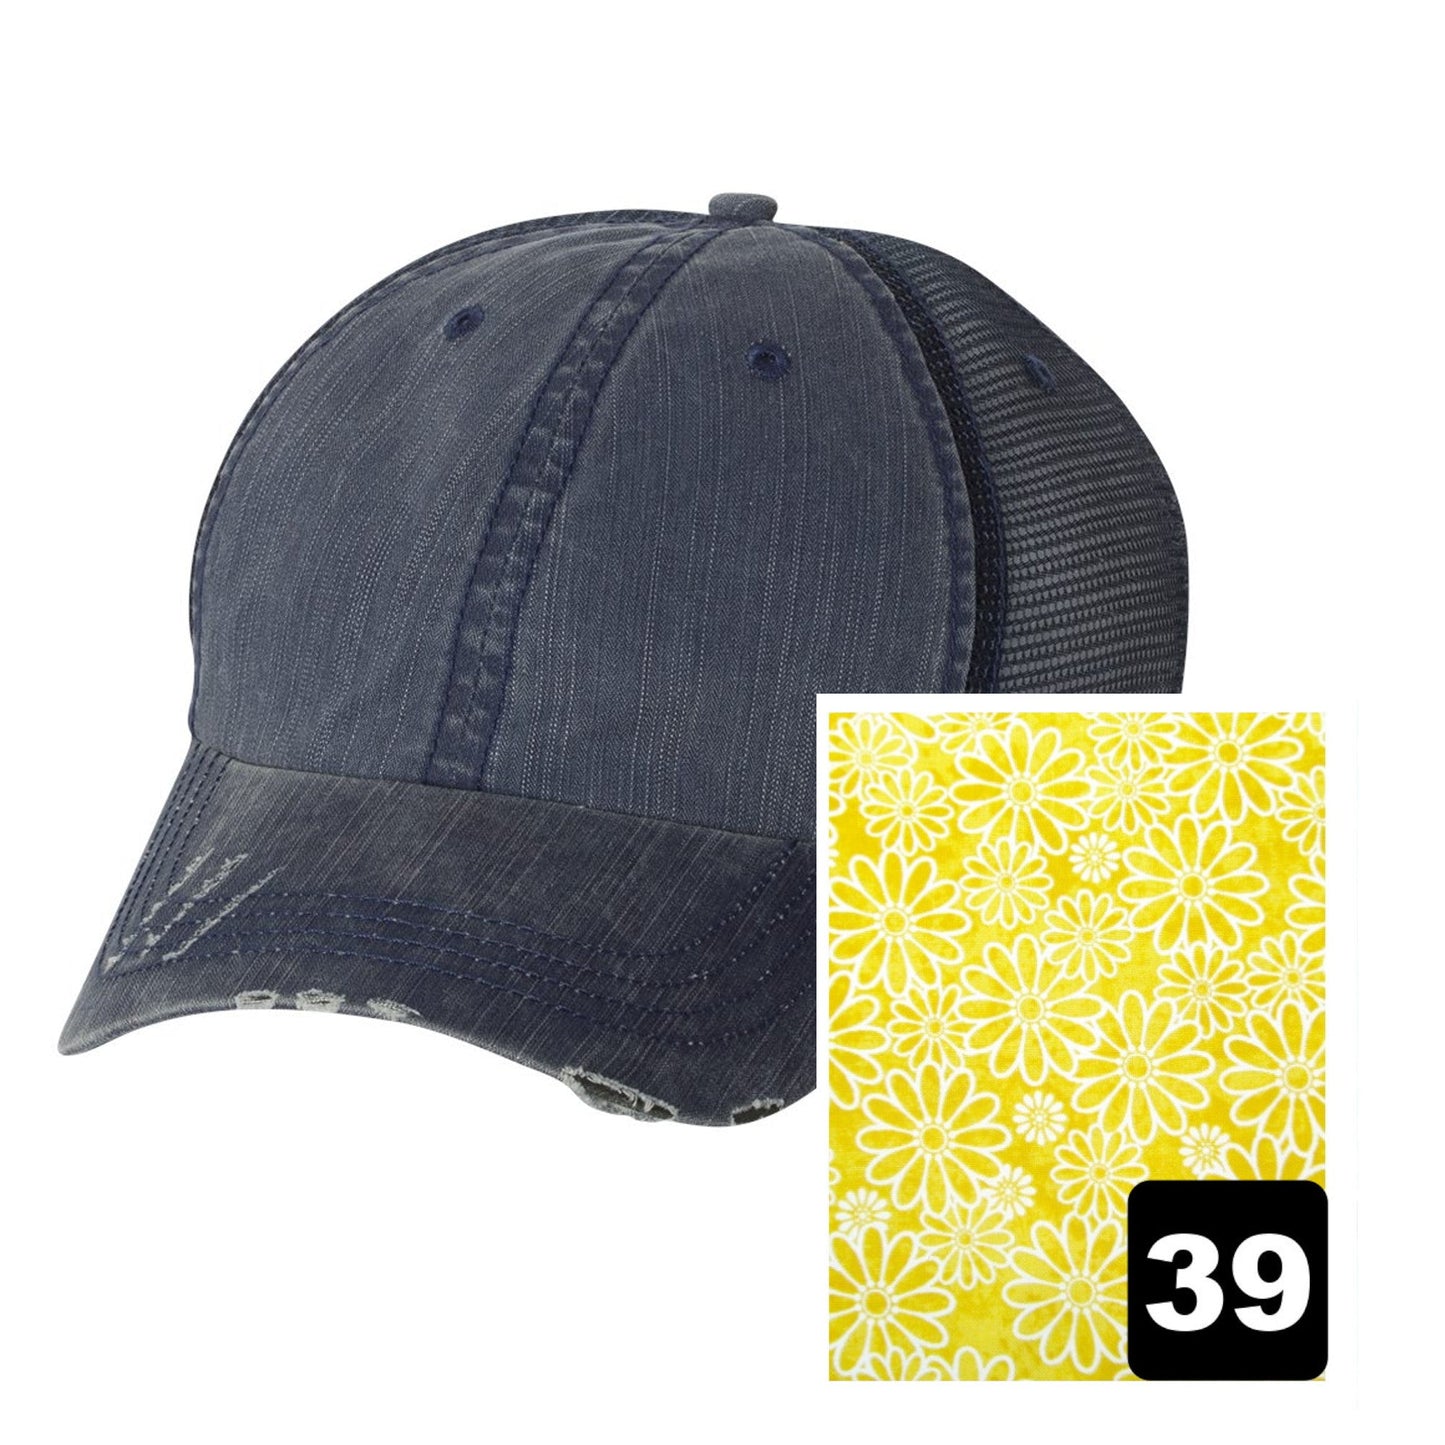 West Virginia Hat | Navy Distressed Trucker Cap | Many Fabric Choices